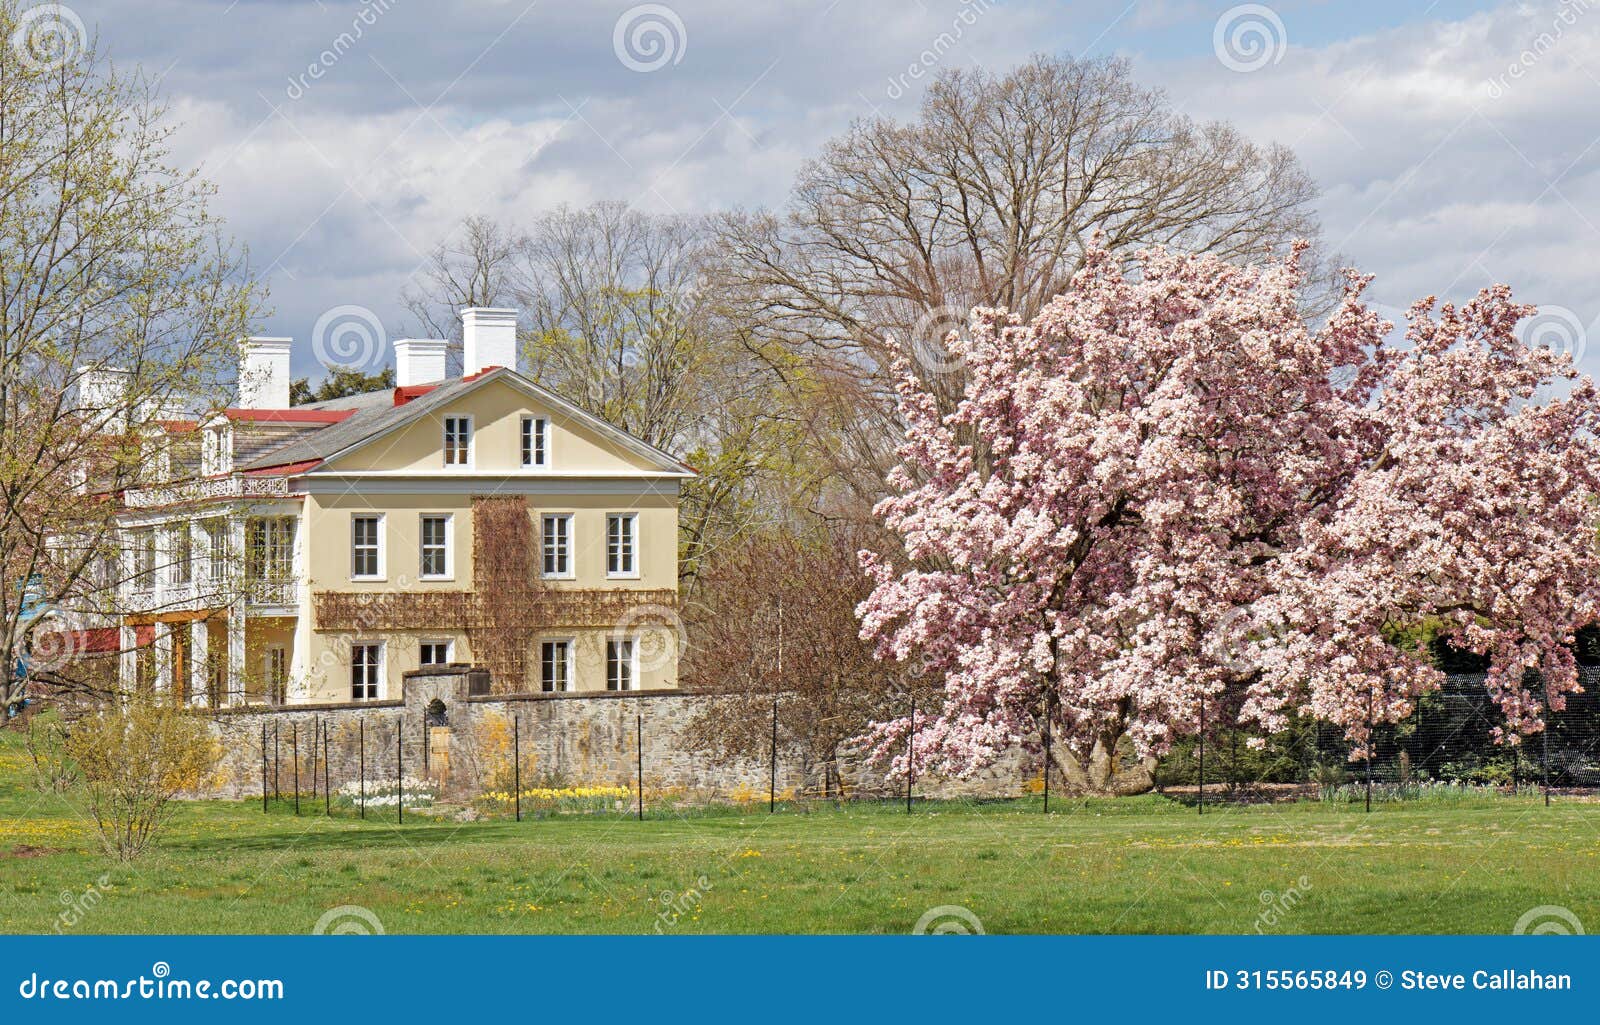 spring magnolia tree and bellefield administration building at fdr historic site